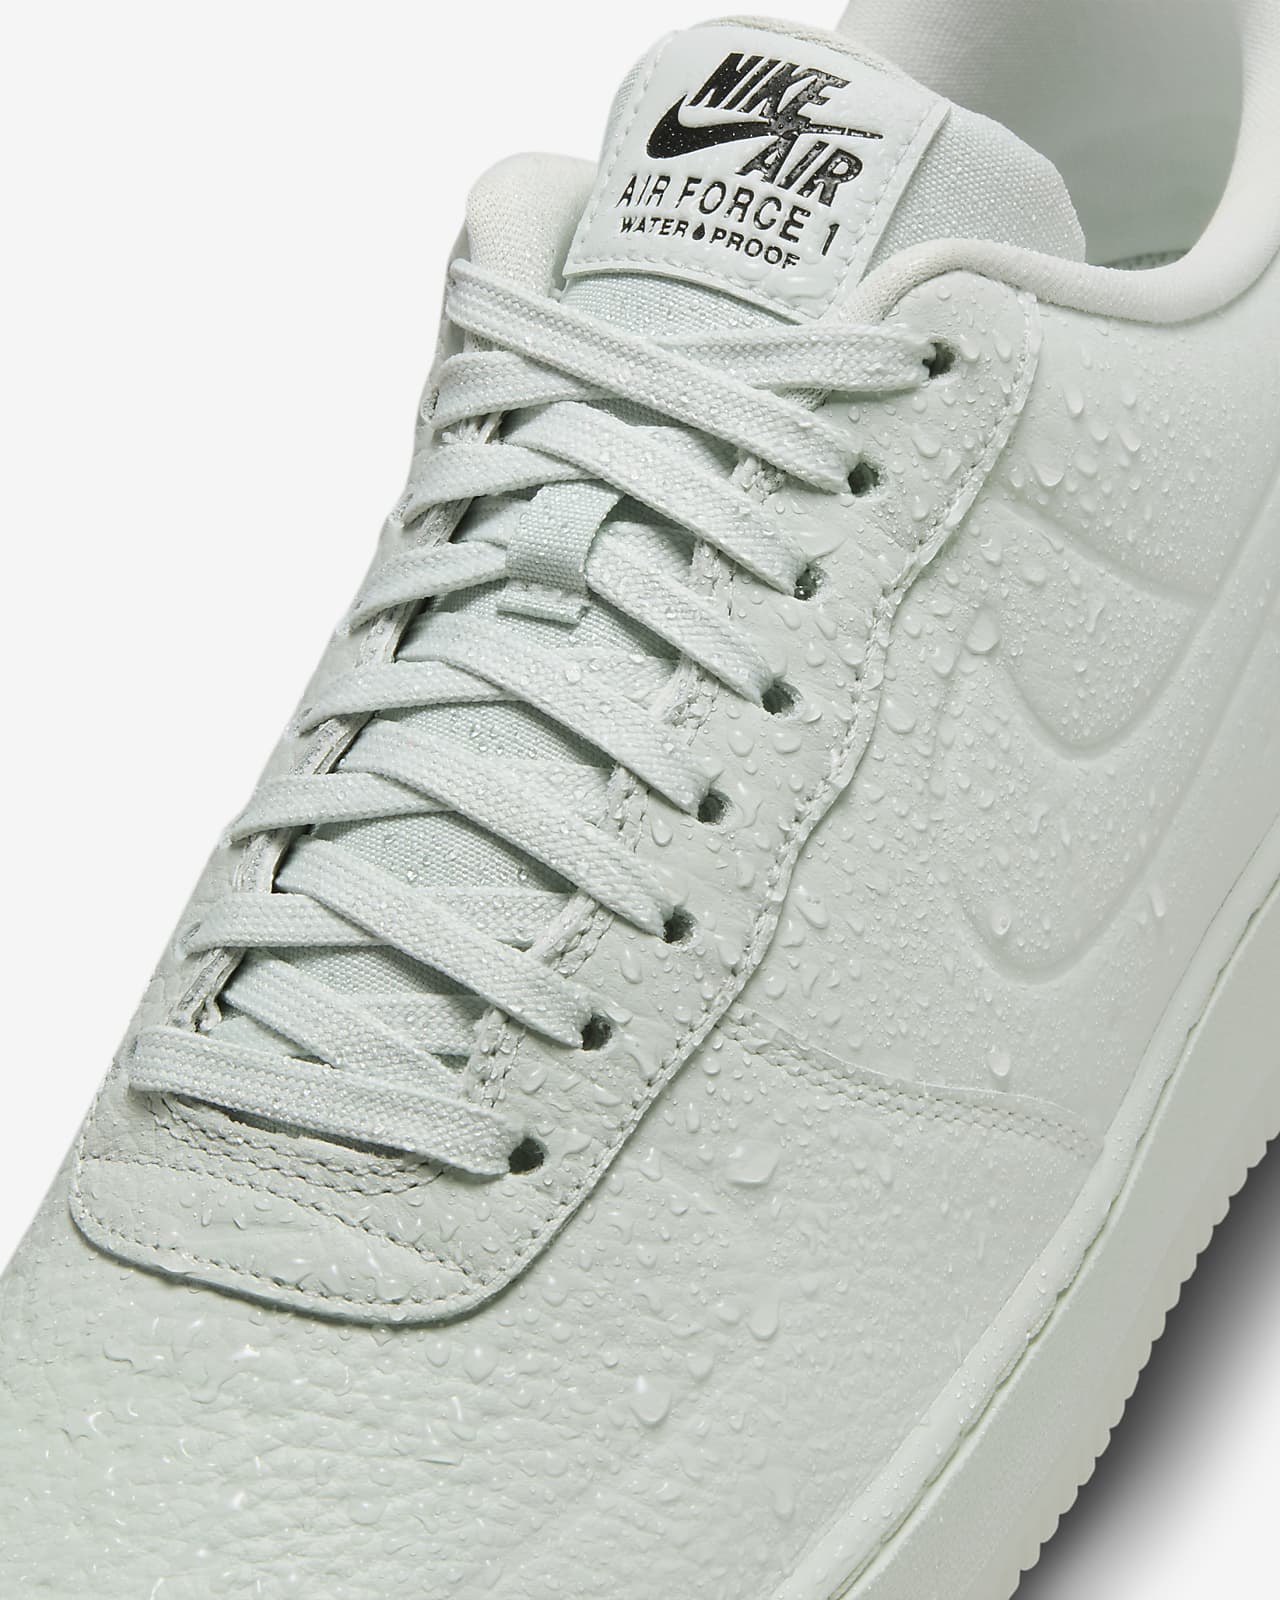 Nike Air Force 1 Luxe Men's Shoes. Nike IL